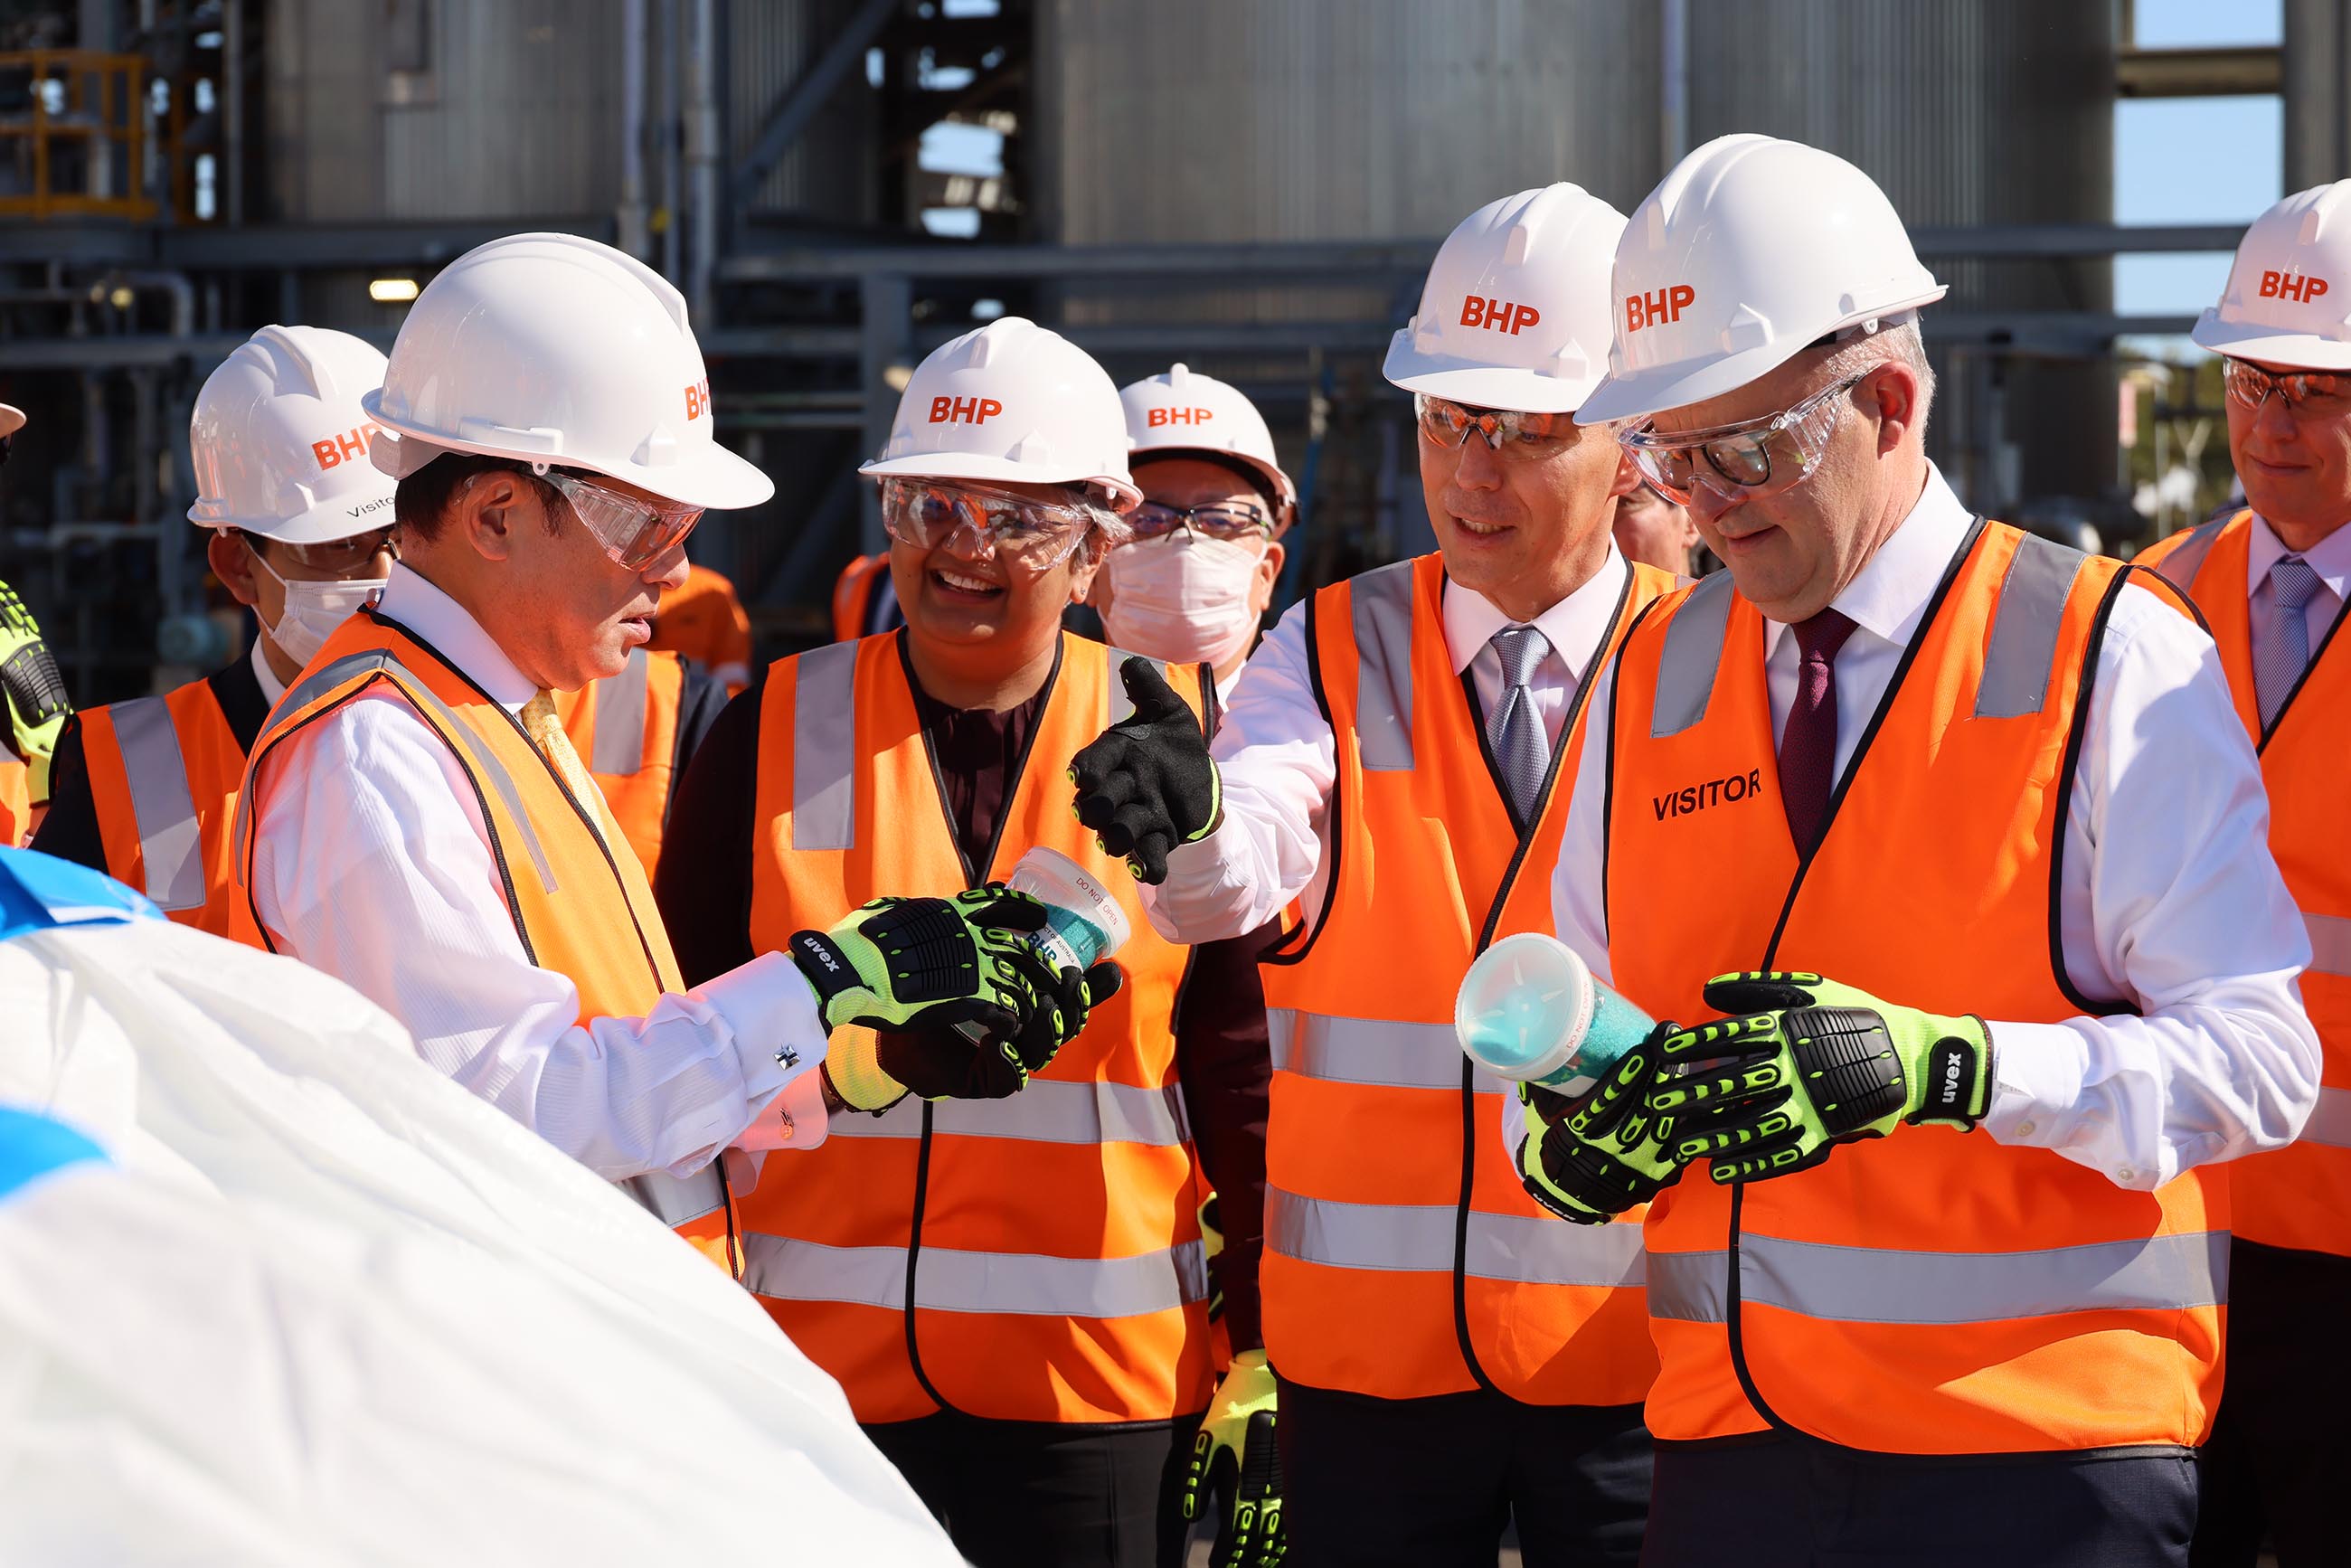 Photograph of the Prime Minister visiting the nickel refinery (2)